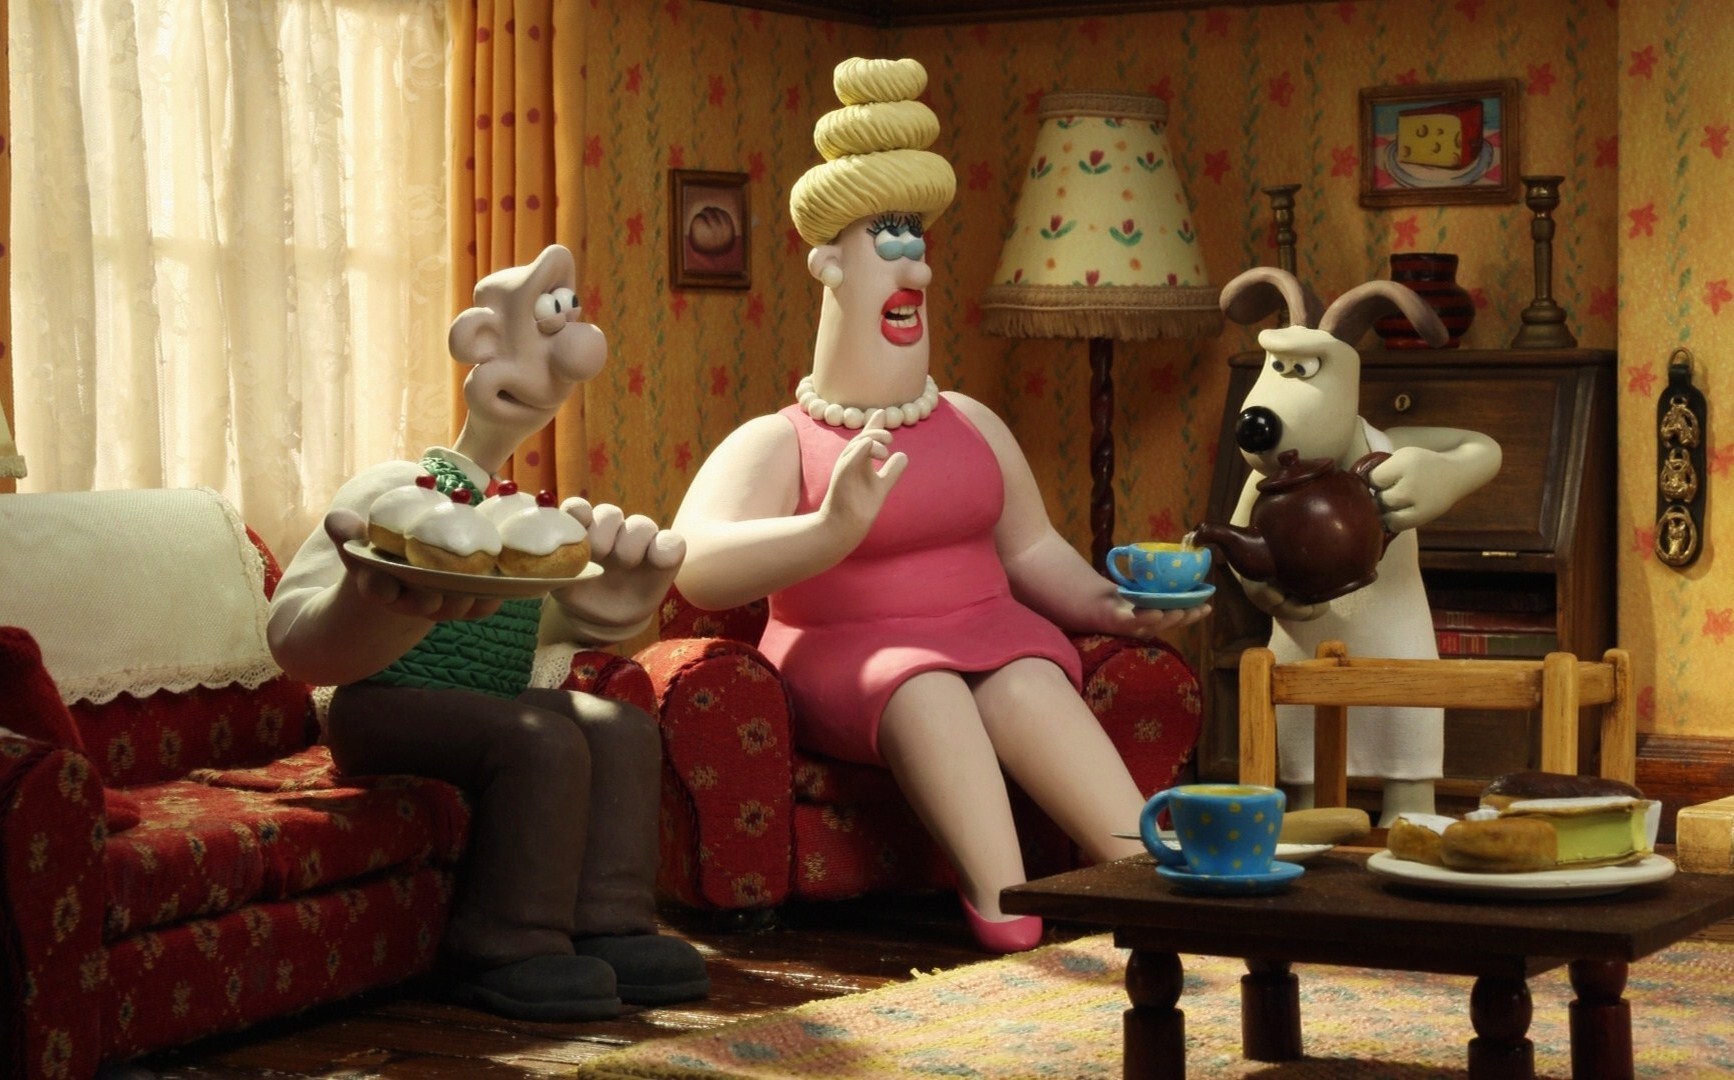 wallace-gromit-wallace-and-gromit-photo-20142380-fanpop